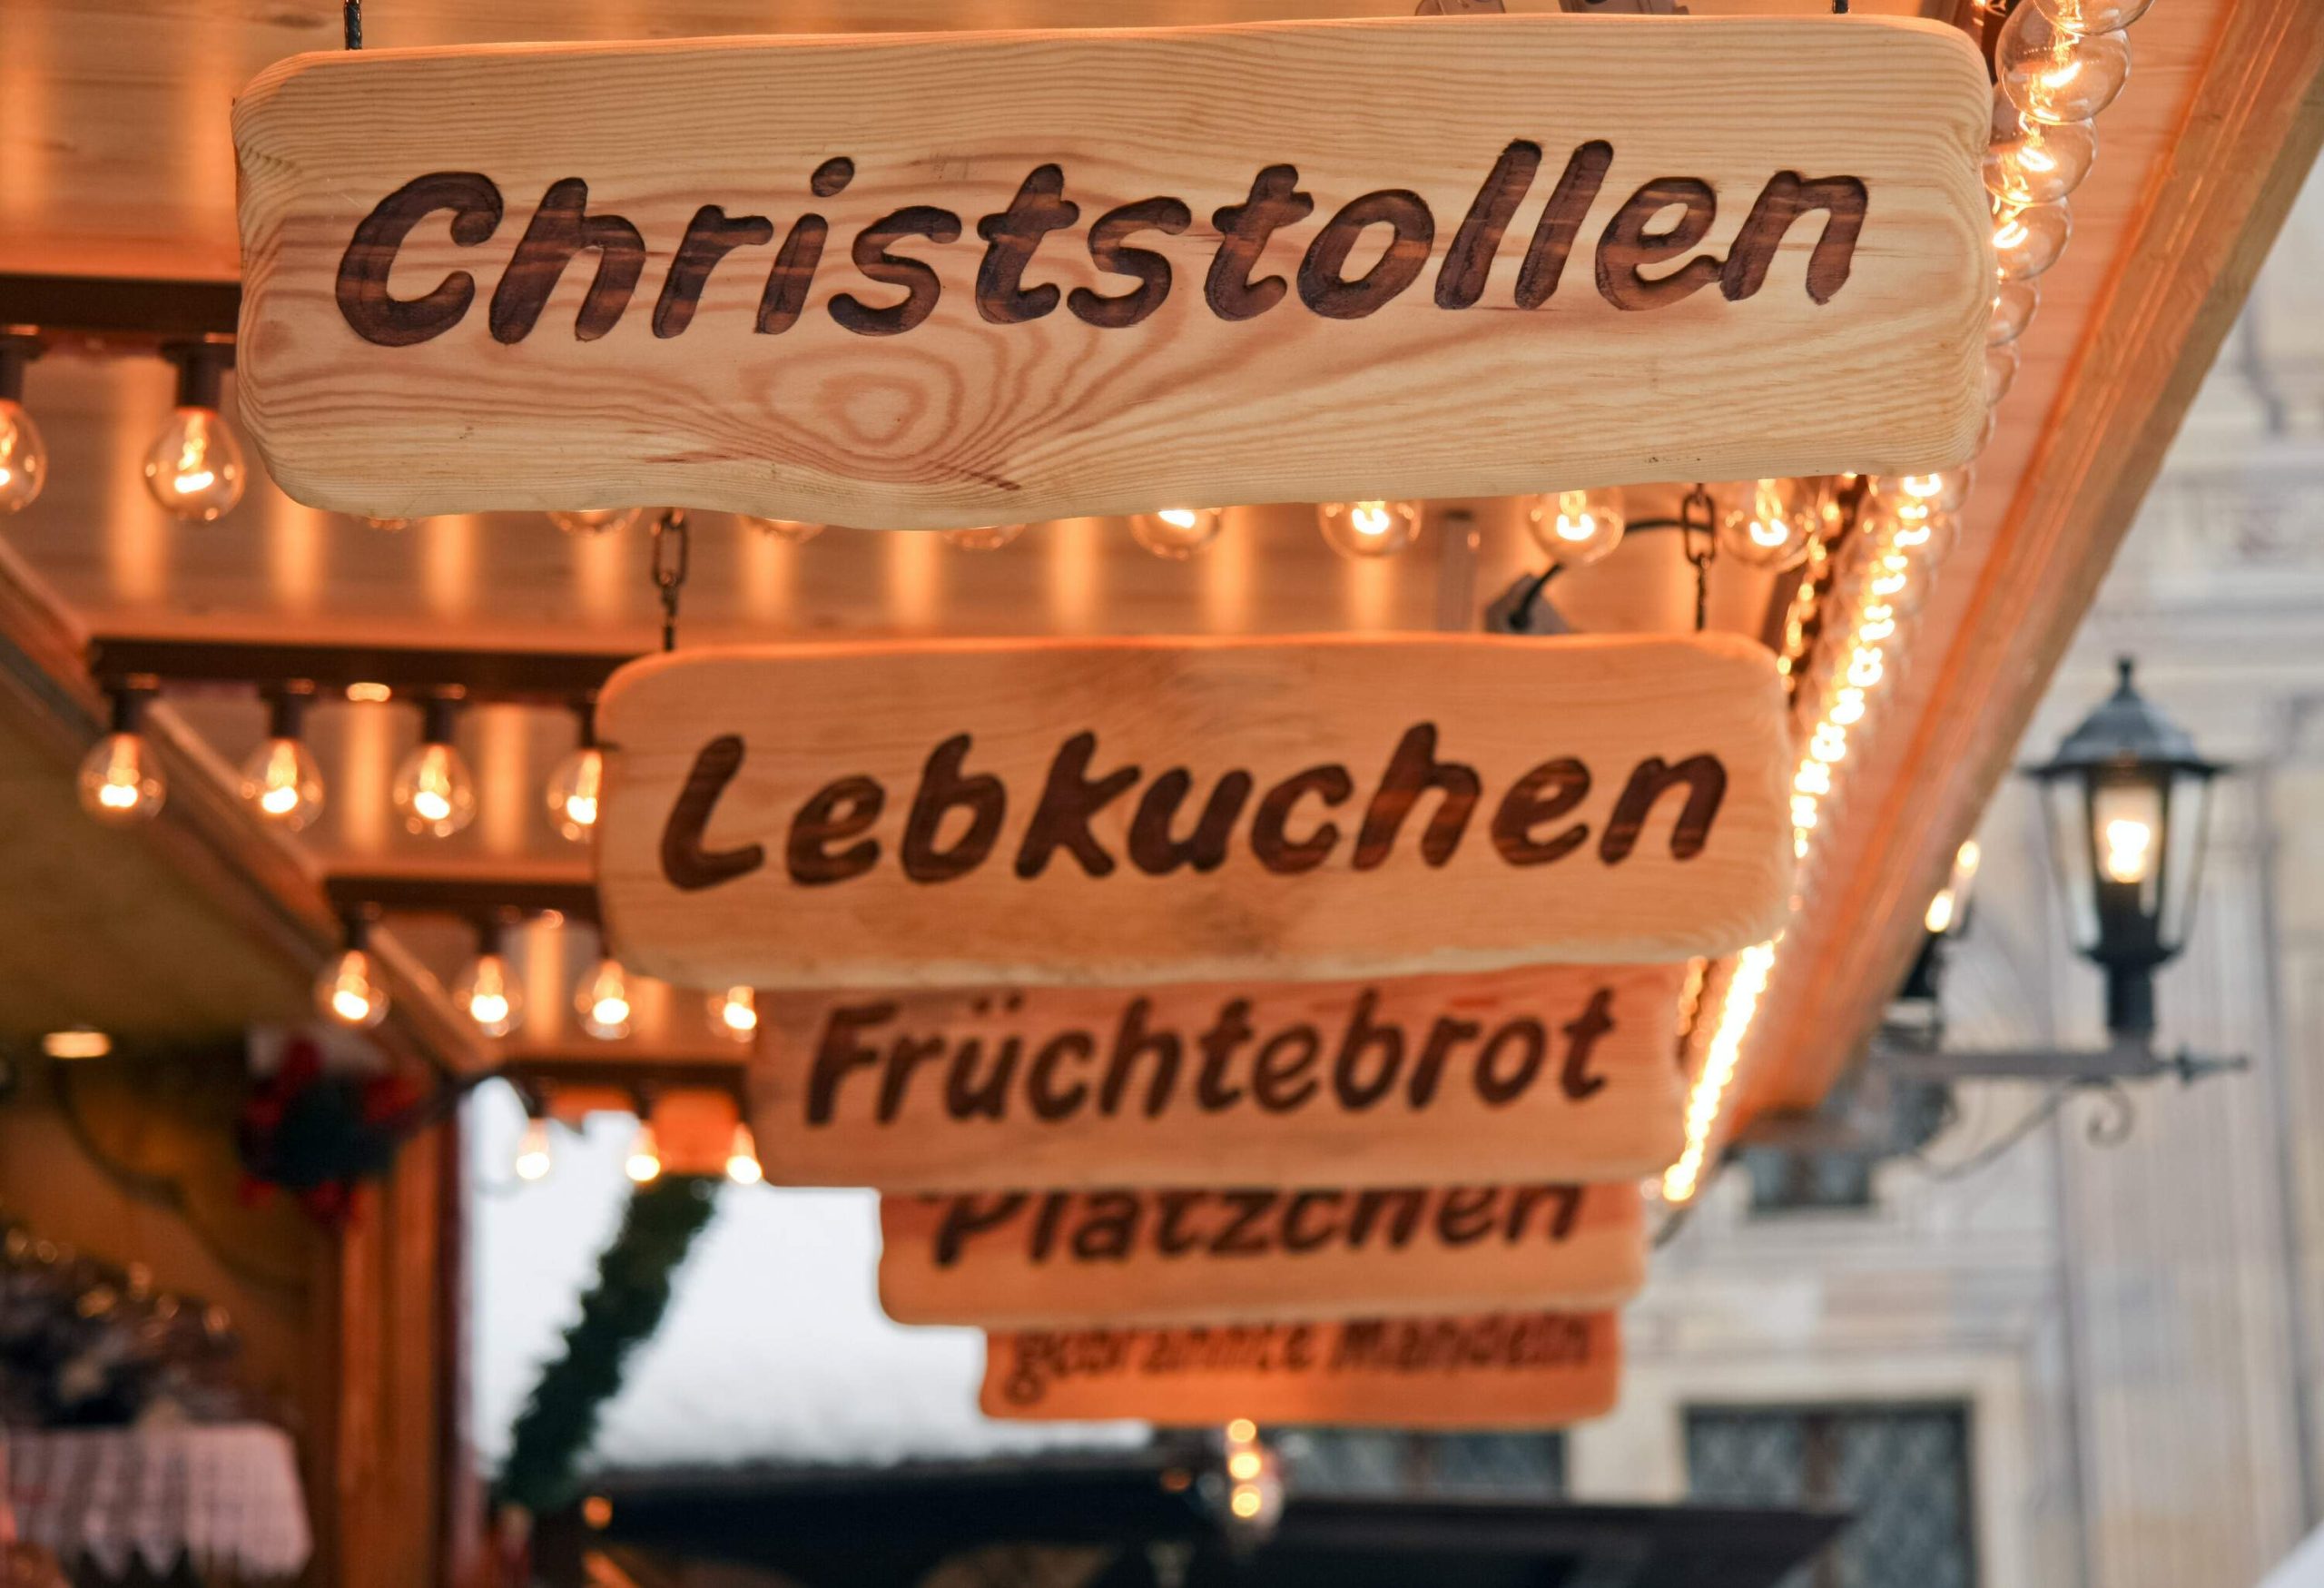 Wood burnt signs in the German language, illuminated with rows of light bulbs.